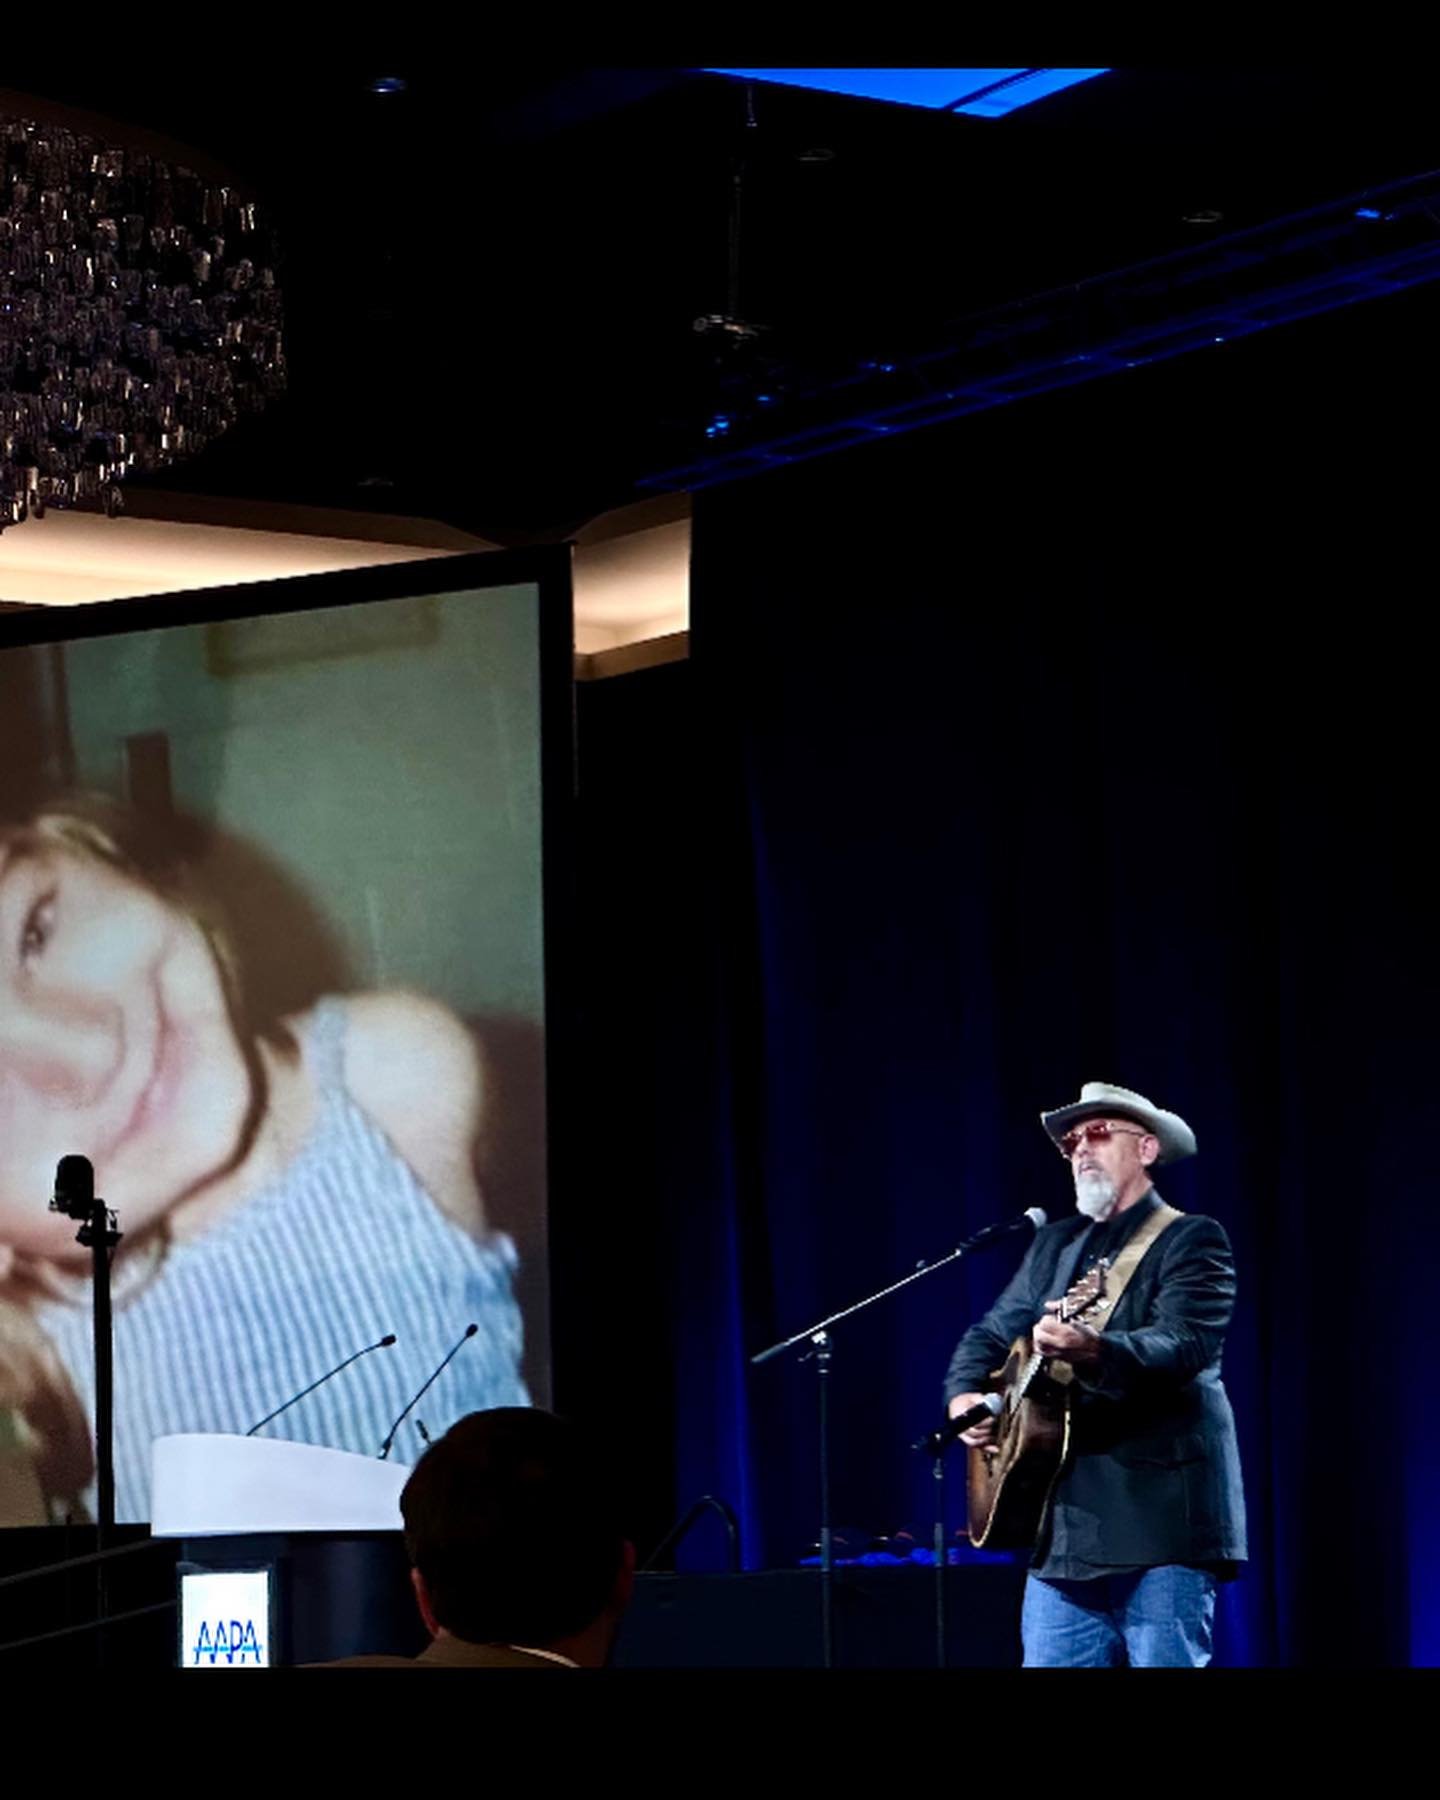 So grateful to the @aapaorg Veterans Caucus for their incredible support! We&rsquo;re thrilled to have had the opportunity to share the mission of Operation Song with everyone in attendance in Houston,TX at their annual event🎶 And a special moment h